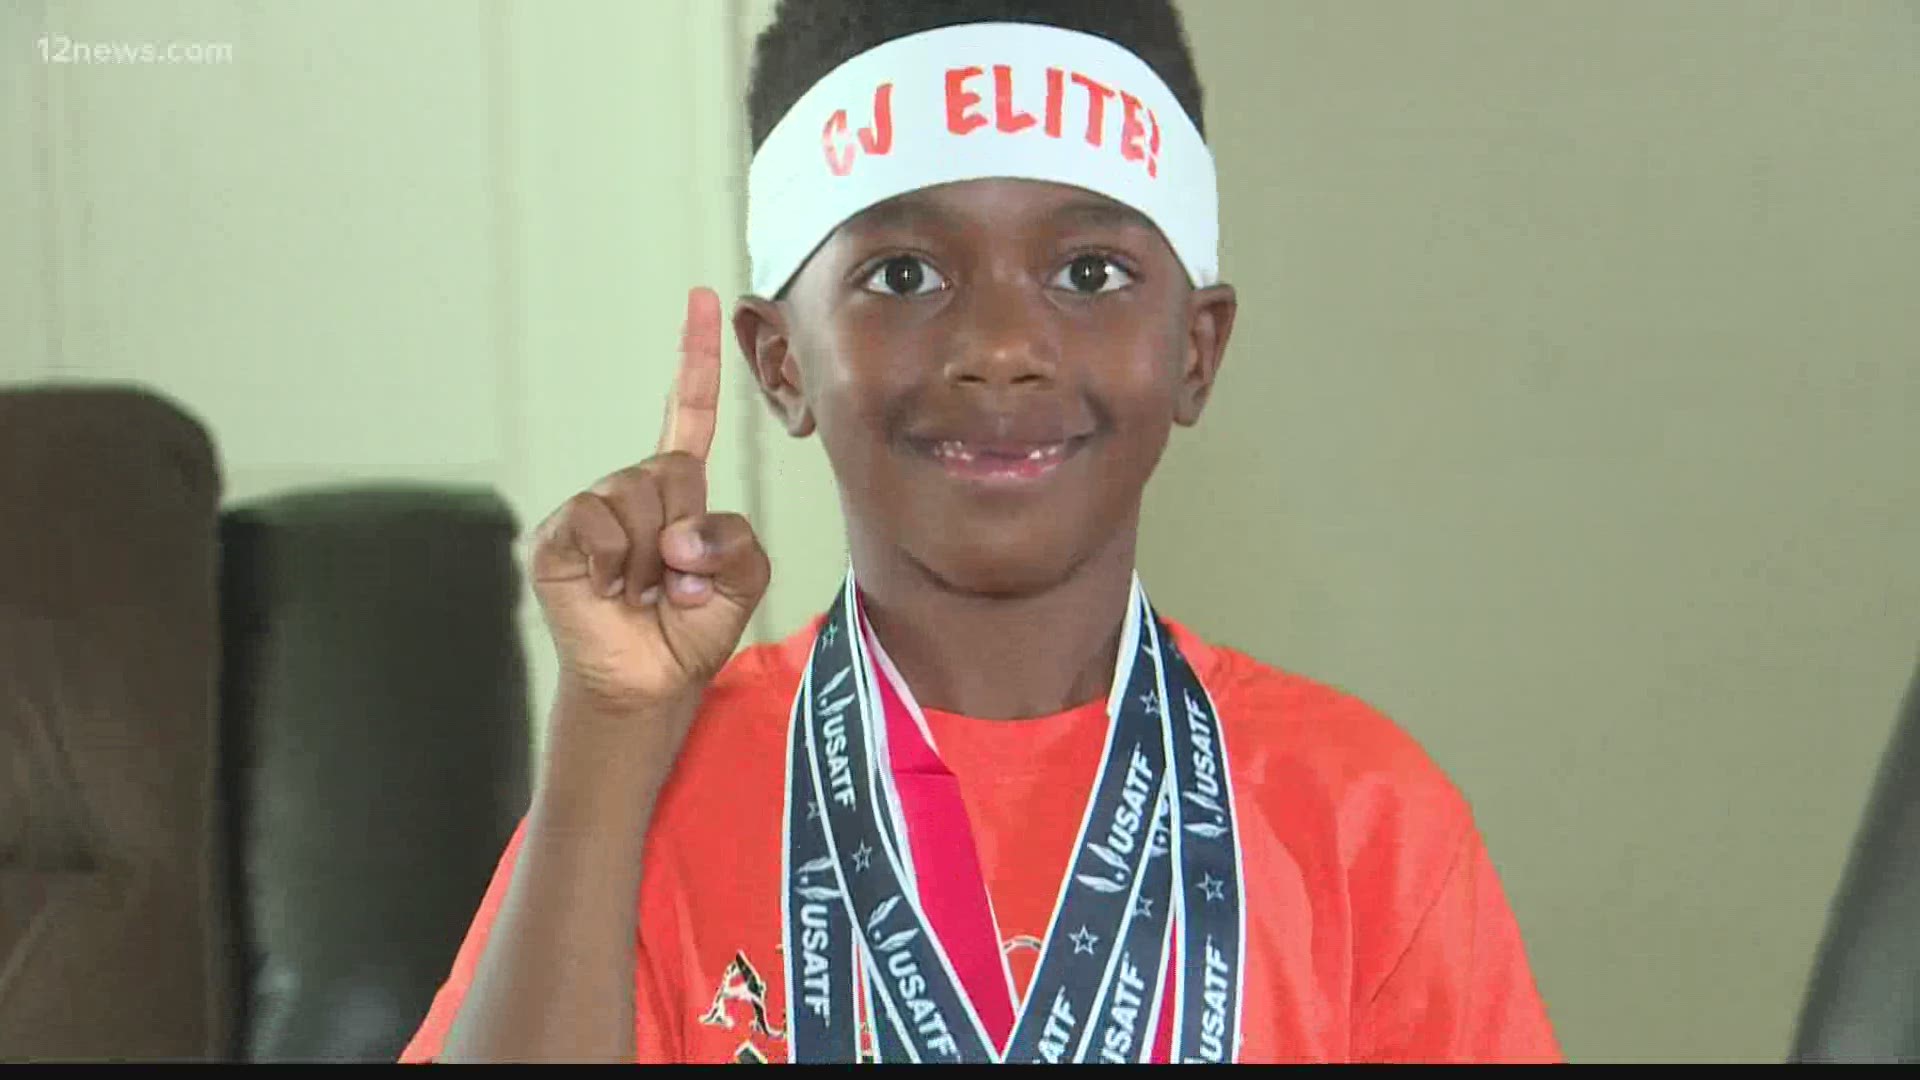 CJ Flowers, the self-described "fastest boy alive", is a Valley 7-year-old who has qualified for the National Junior Olympics. He's been competing for three years.